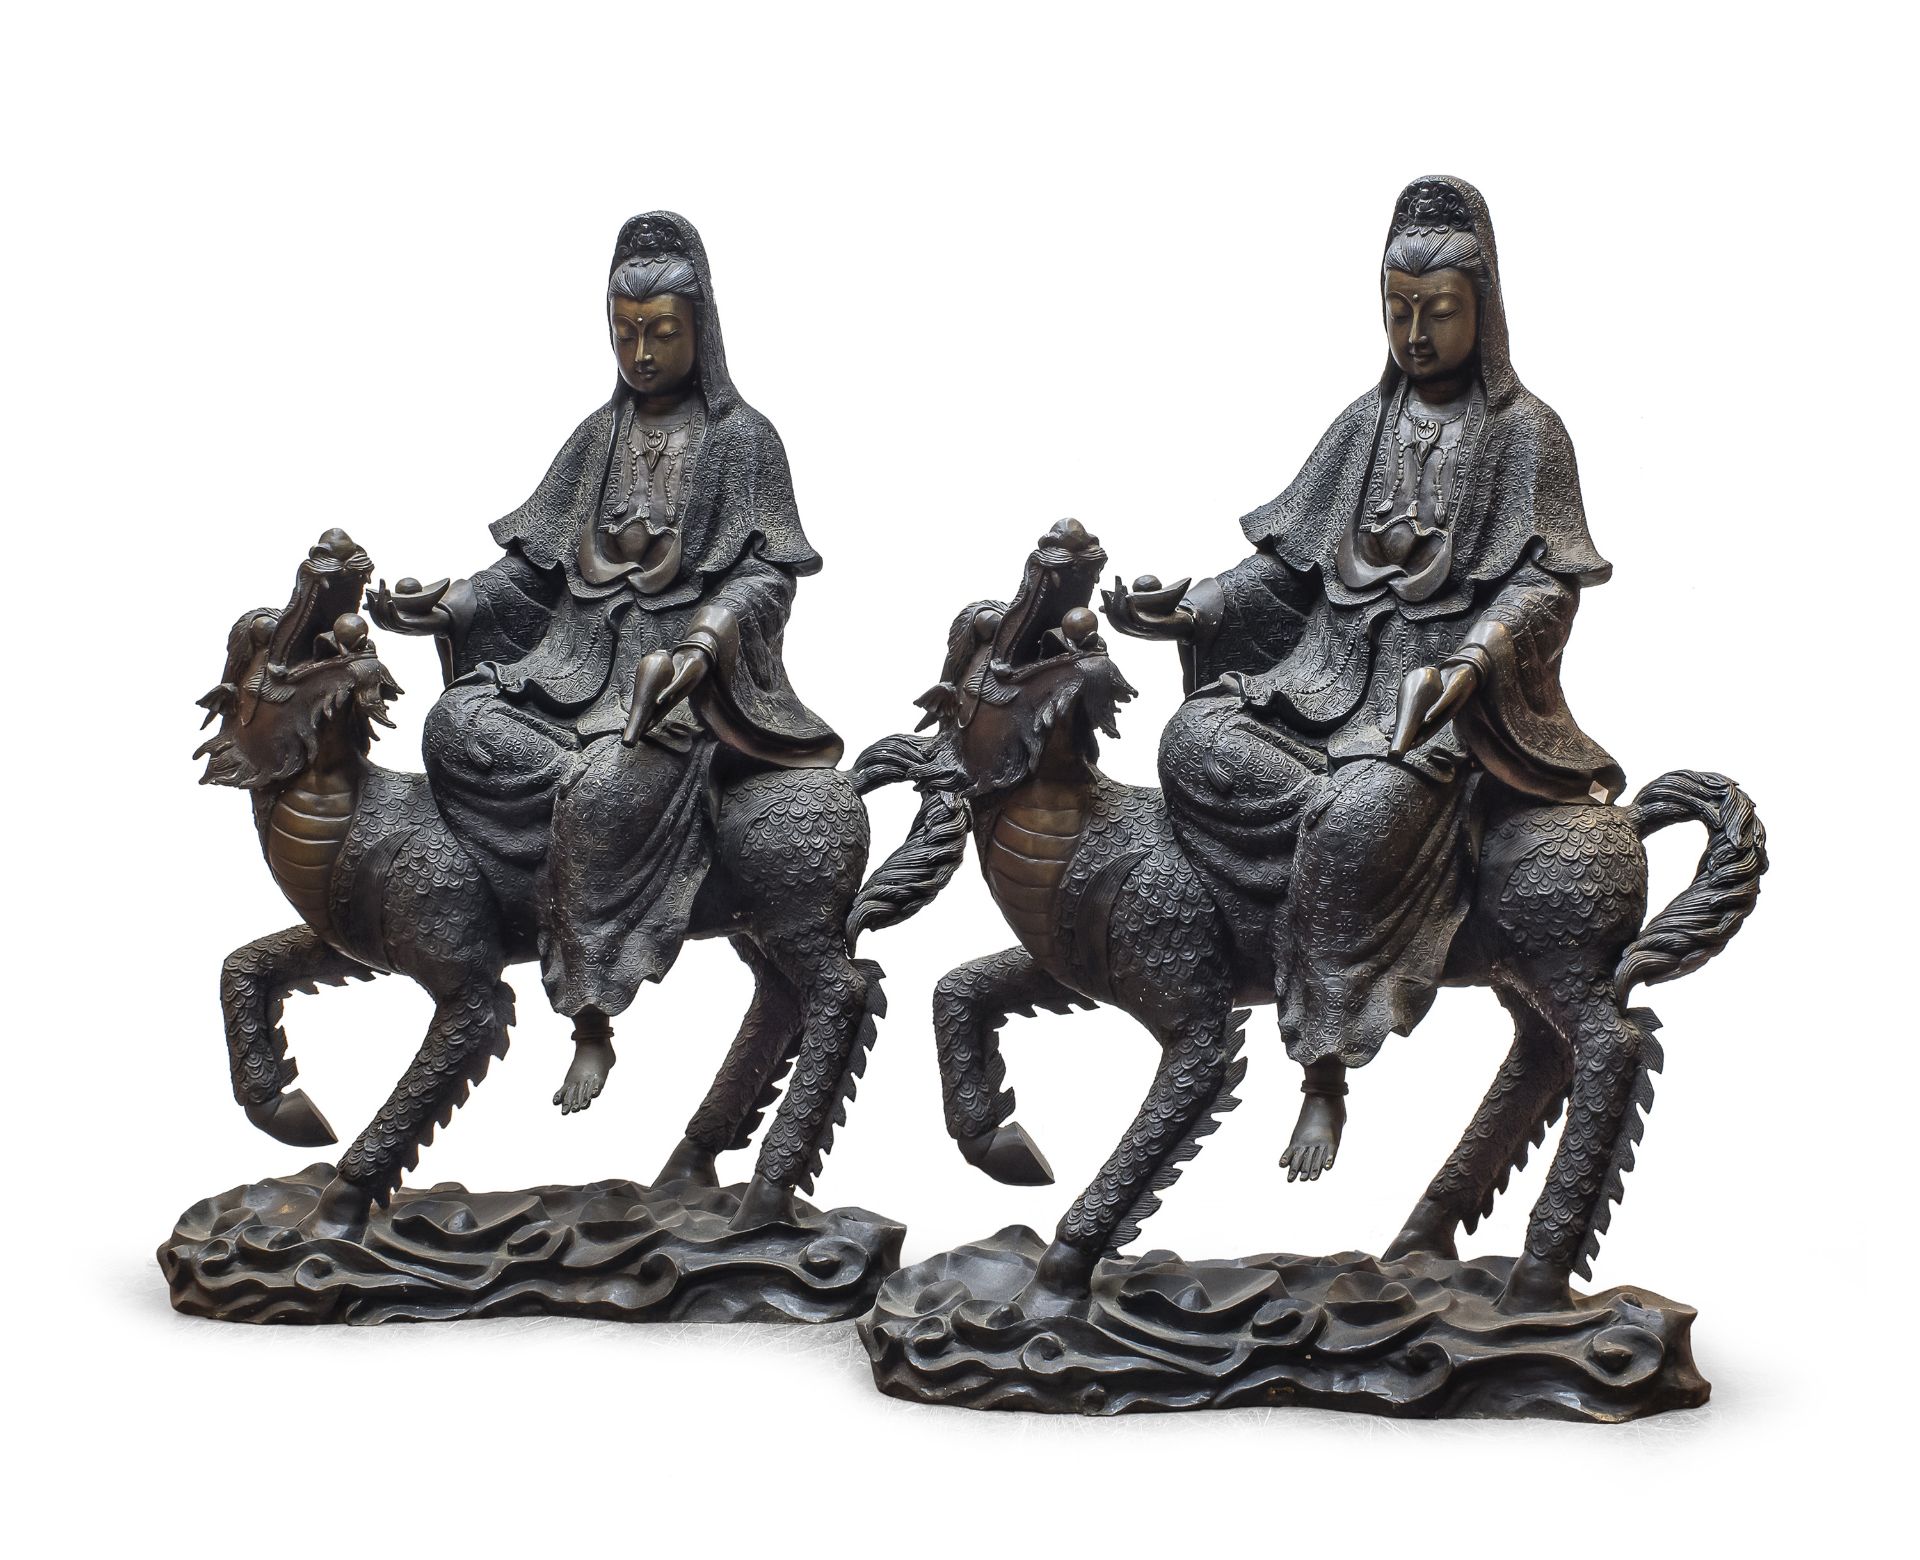 A PAIR OF LARGE BRONZE SCULPTURES DEPICTING MONJU BOSATSU. END 19TH EARLY 20TH CENTURY.